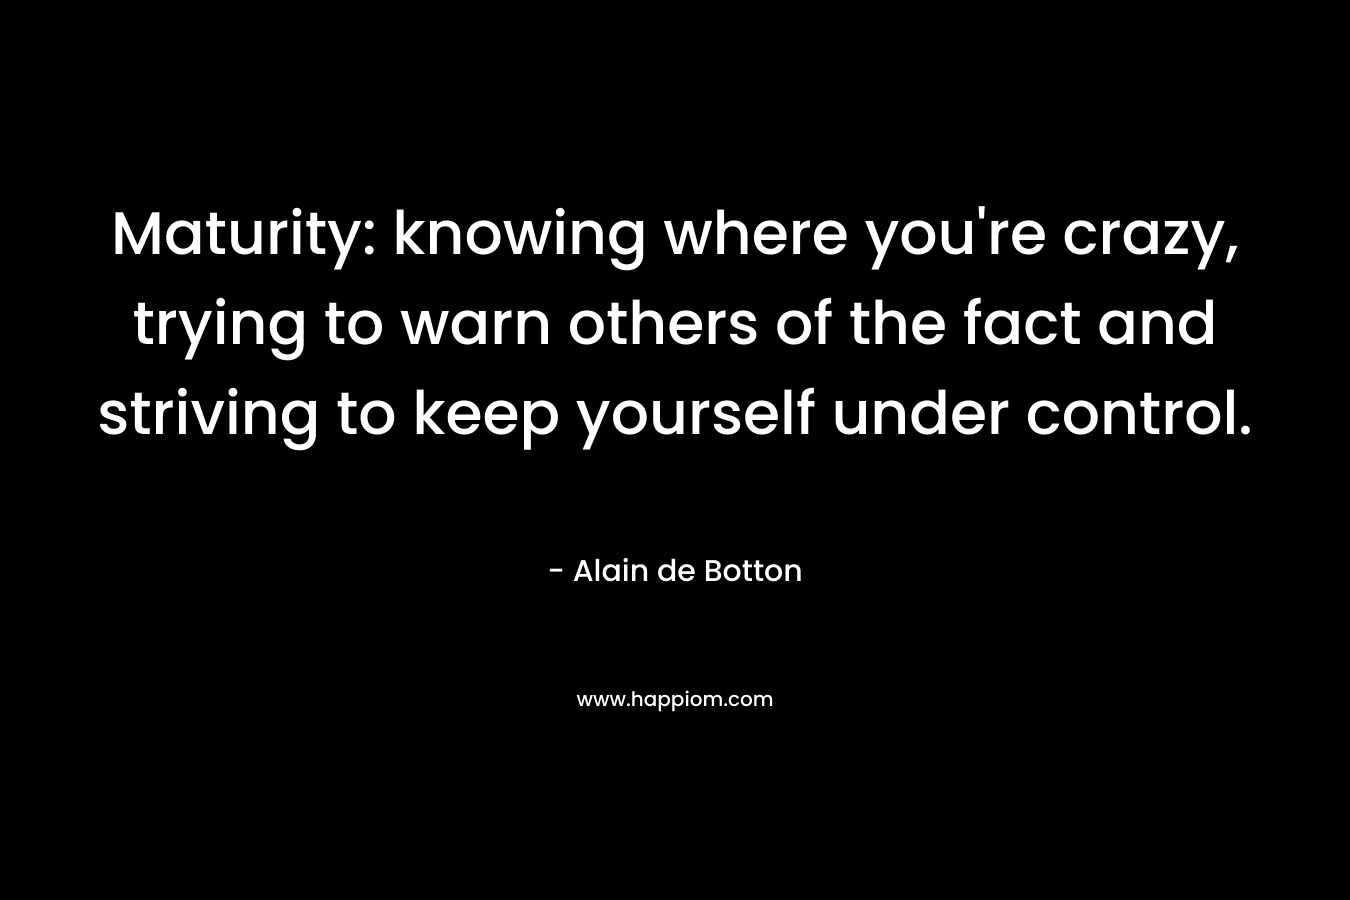 Maturity: knowing where you're crazy, trying to warn others of the fact and striving to keep yourself under control.